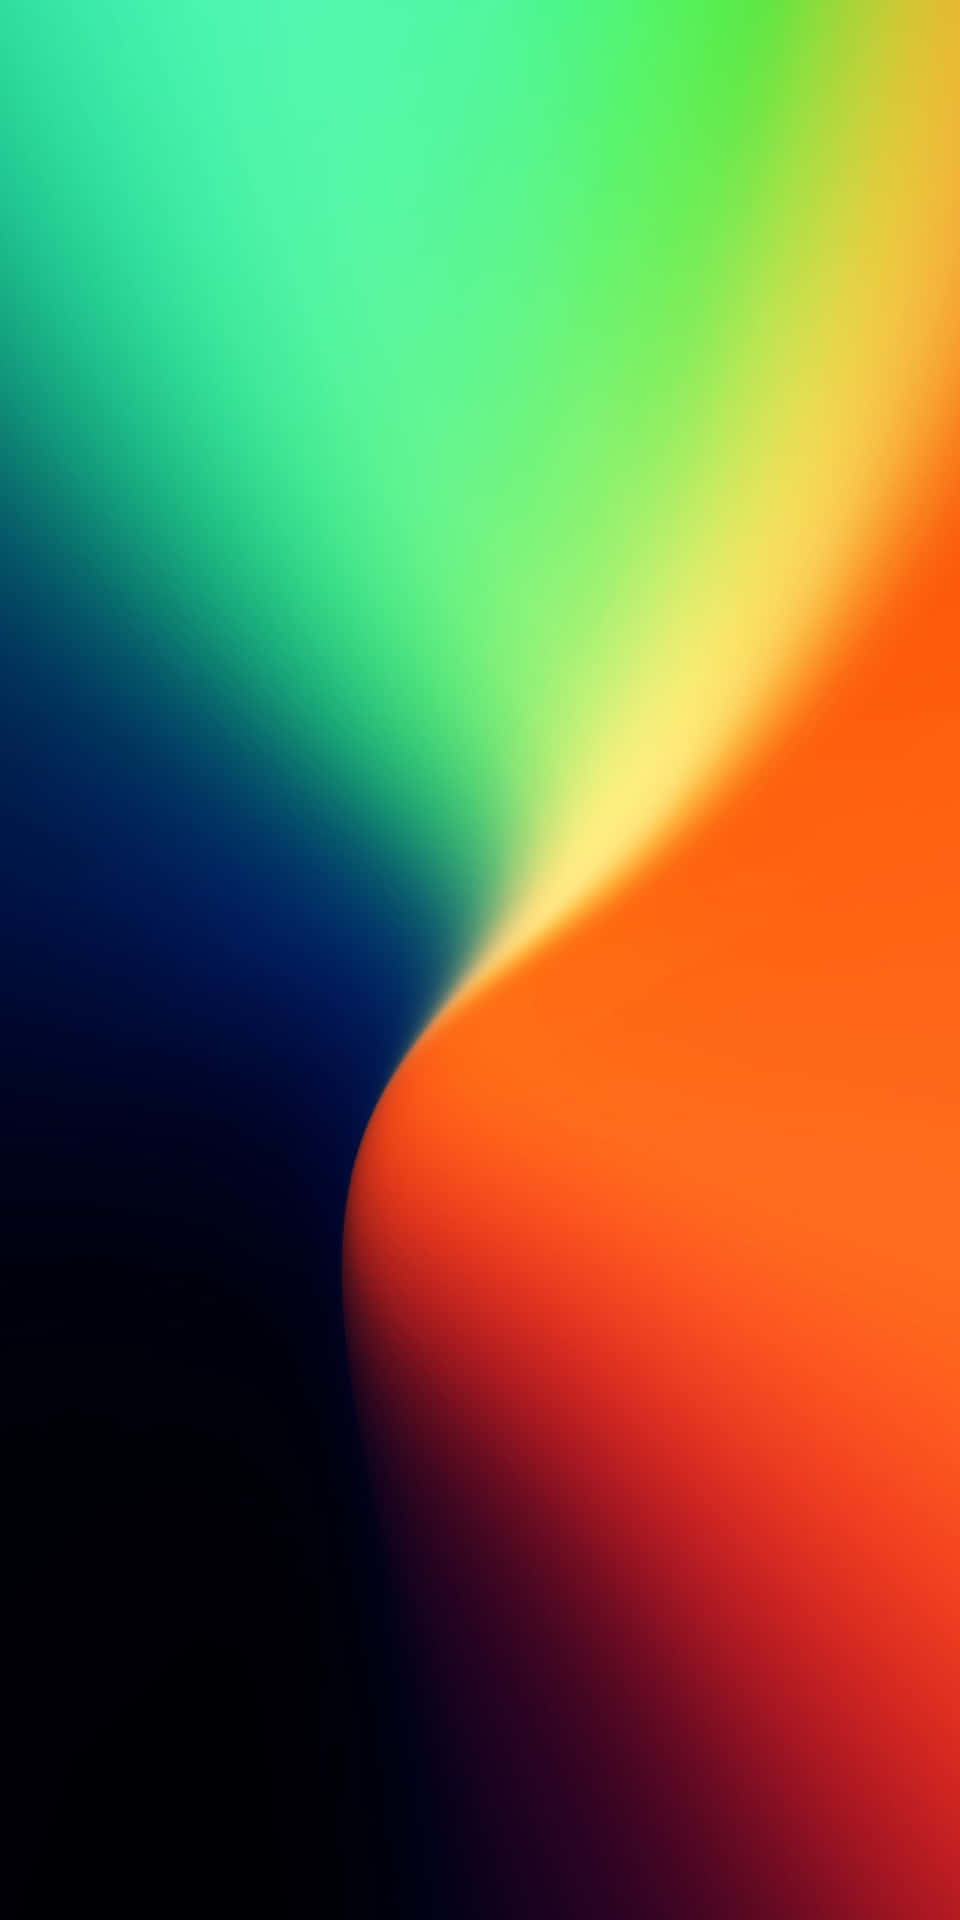 Orange and Blue Abstract Art